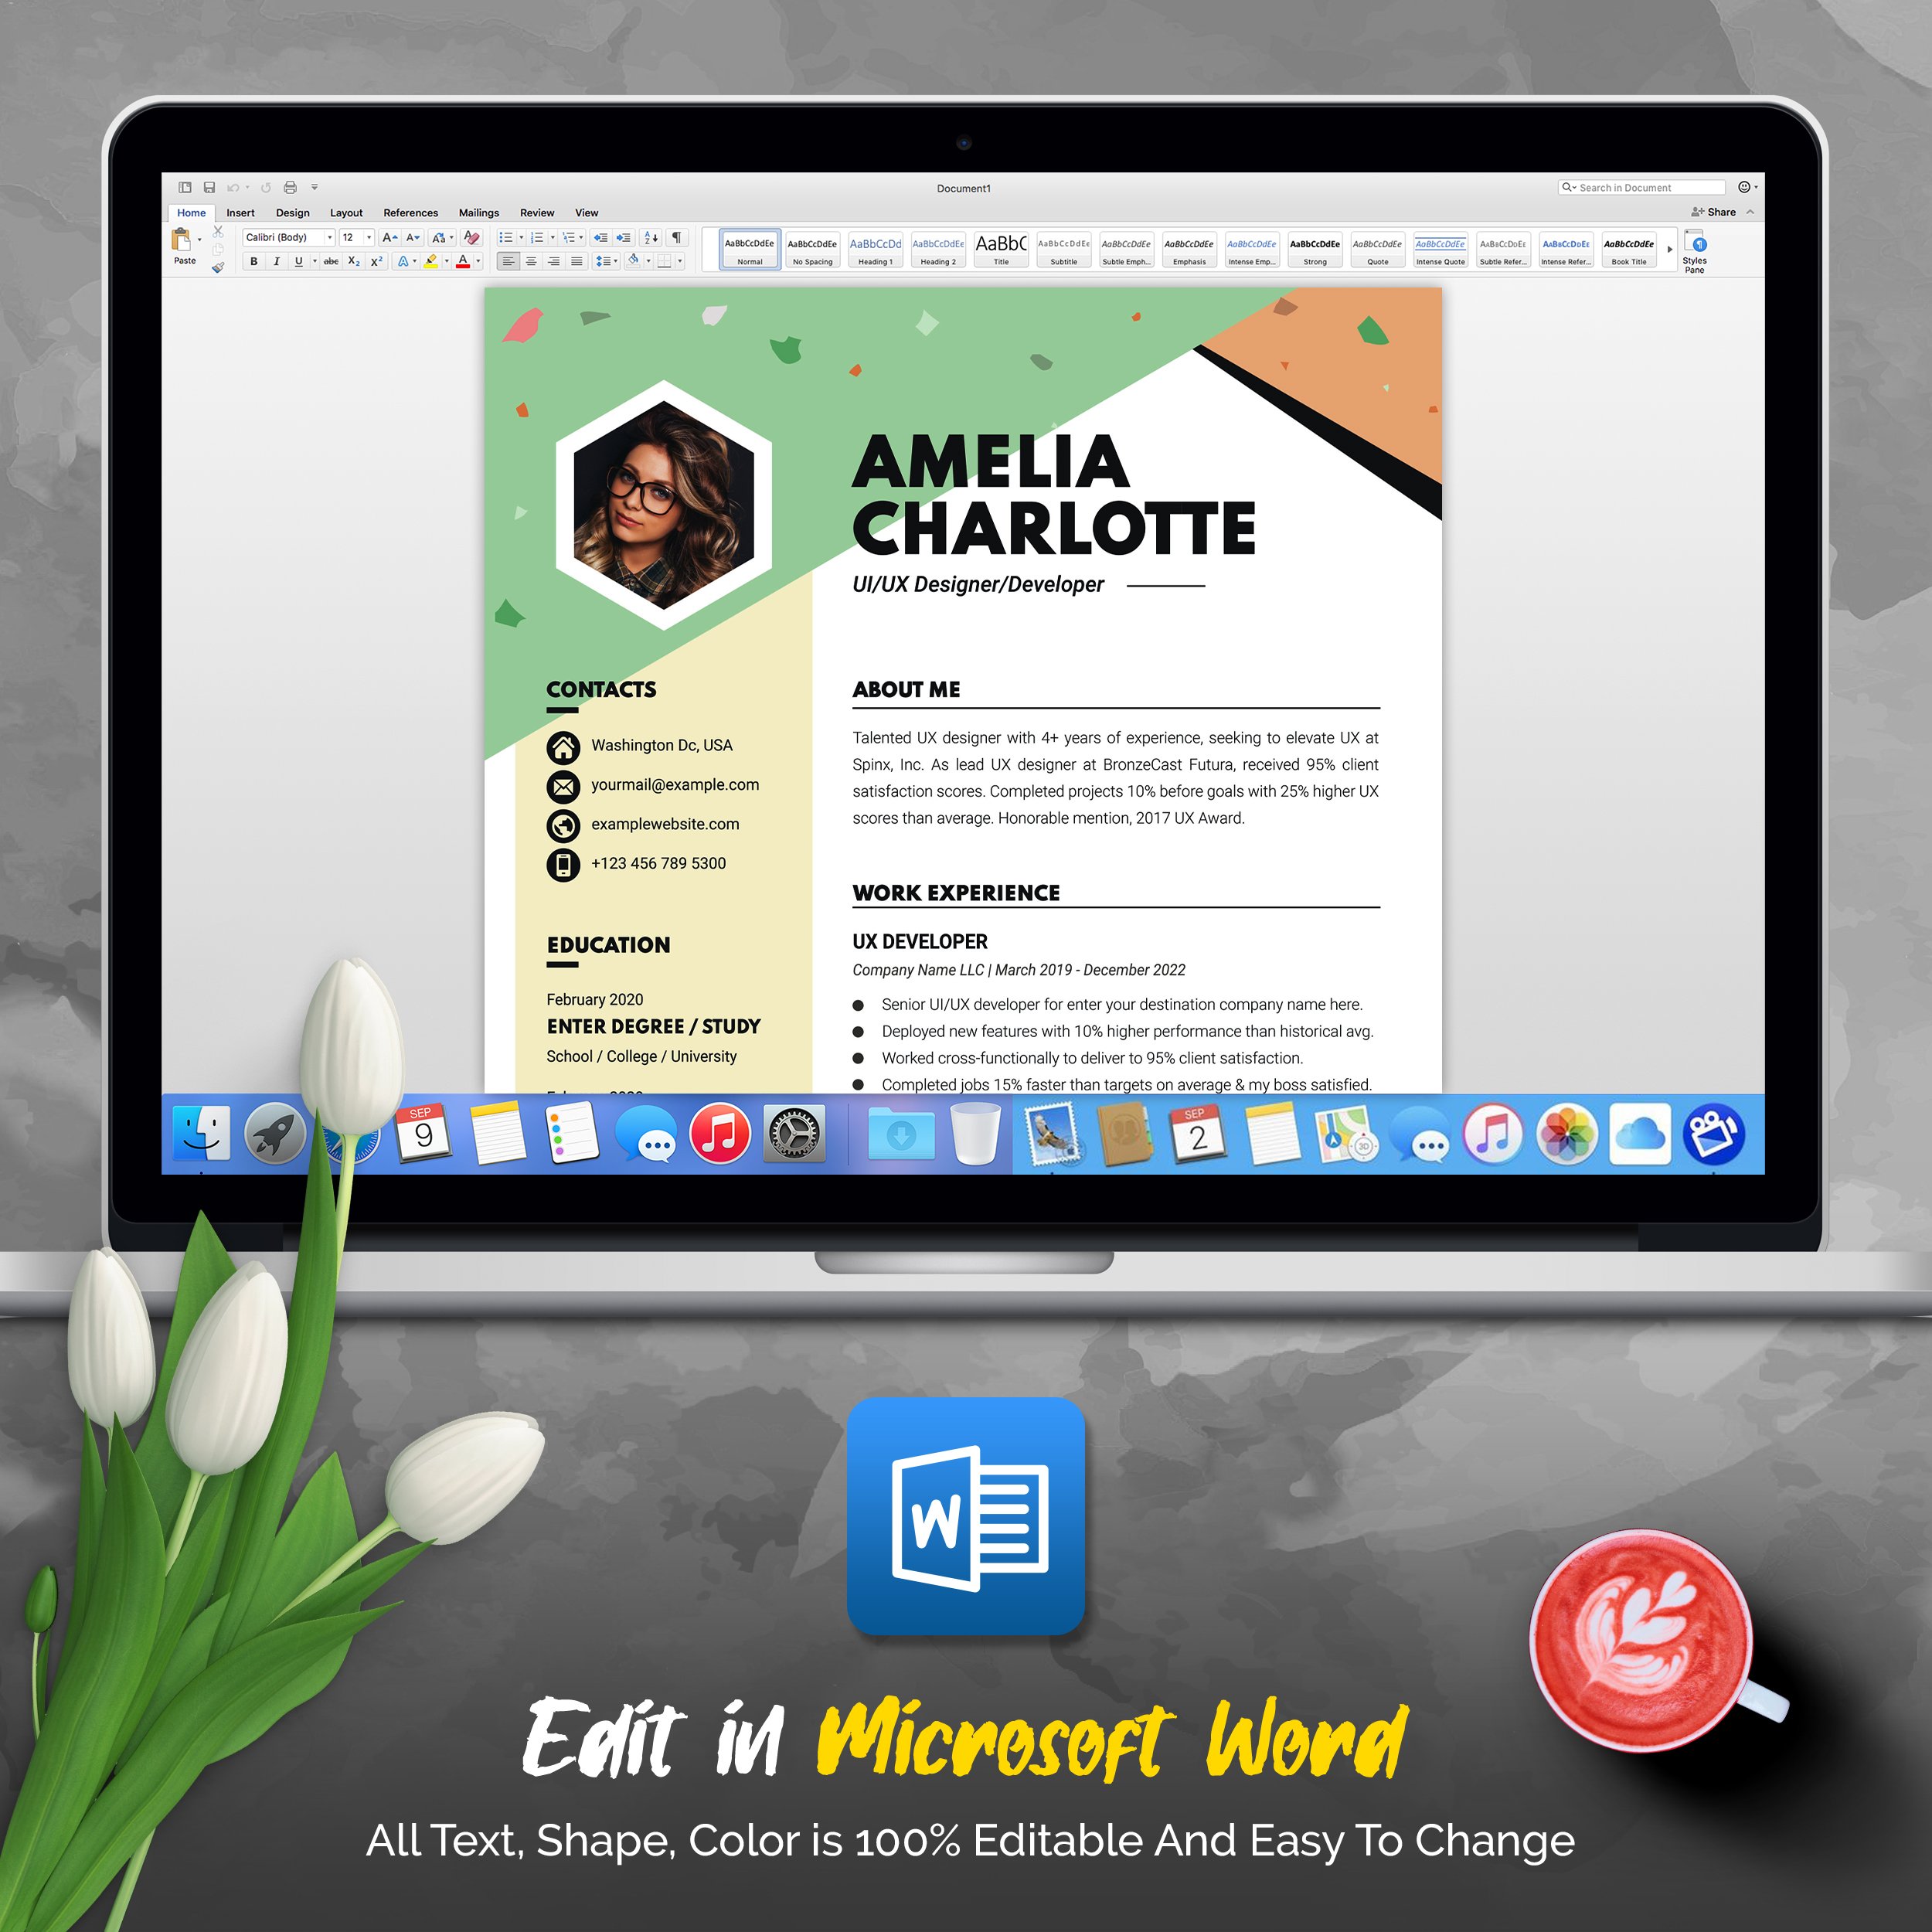 04 4 pages professional ms word aple pages eps photoshop psd resume cv design template design by resume inventor 951